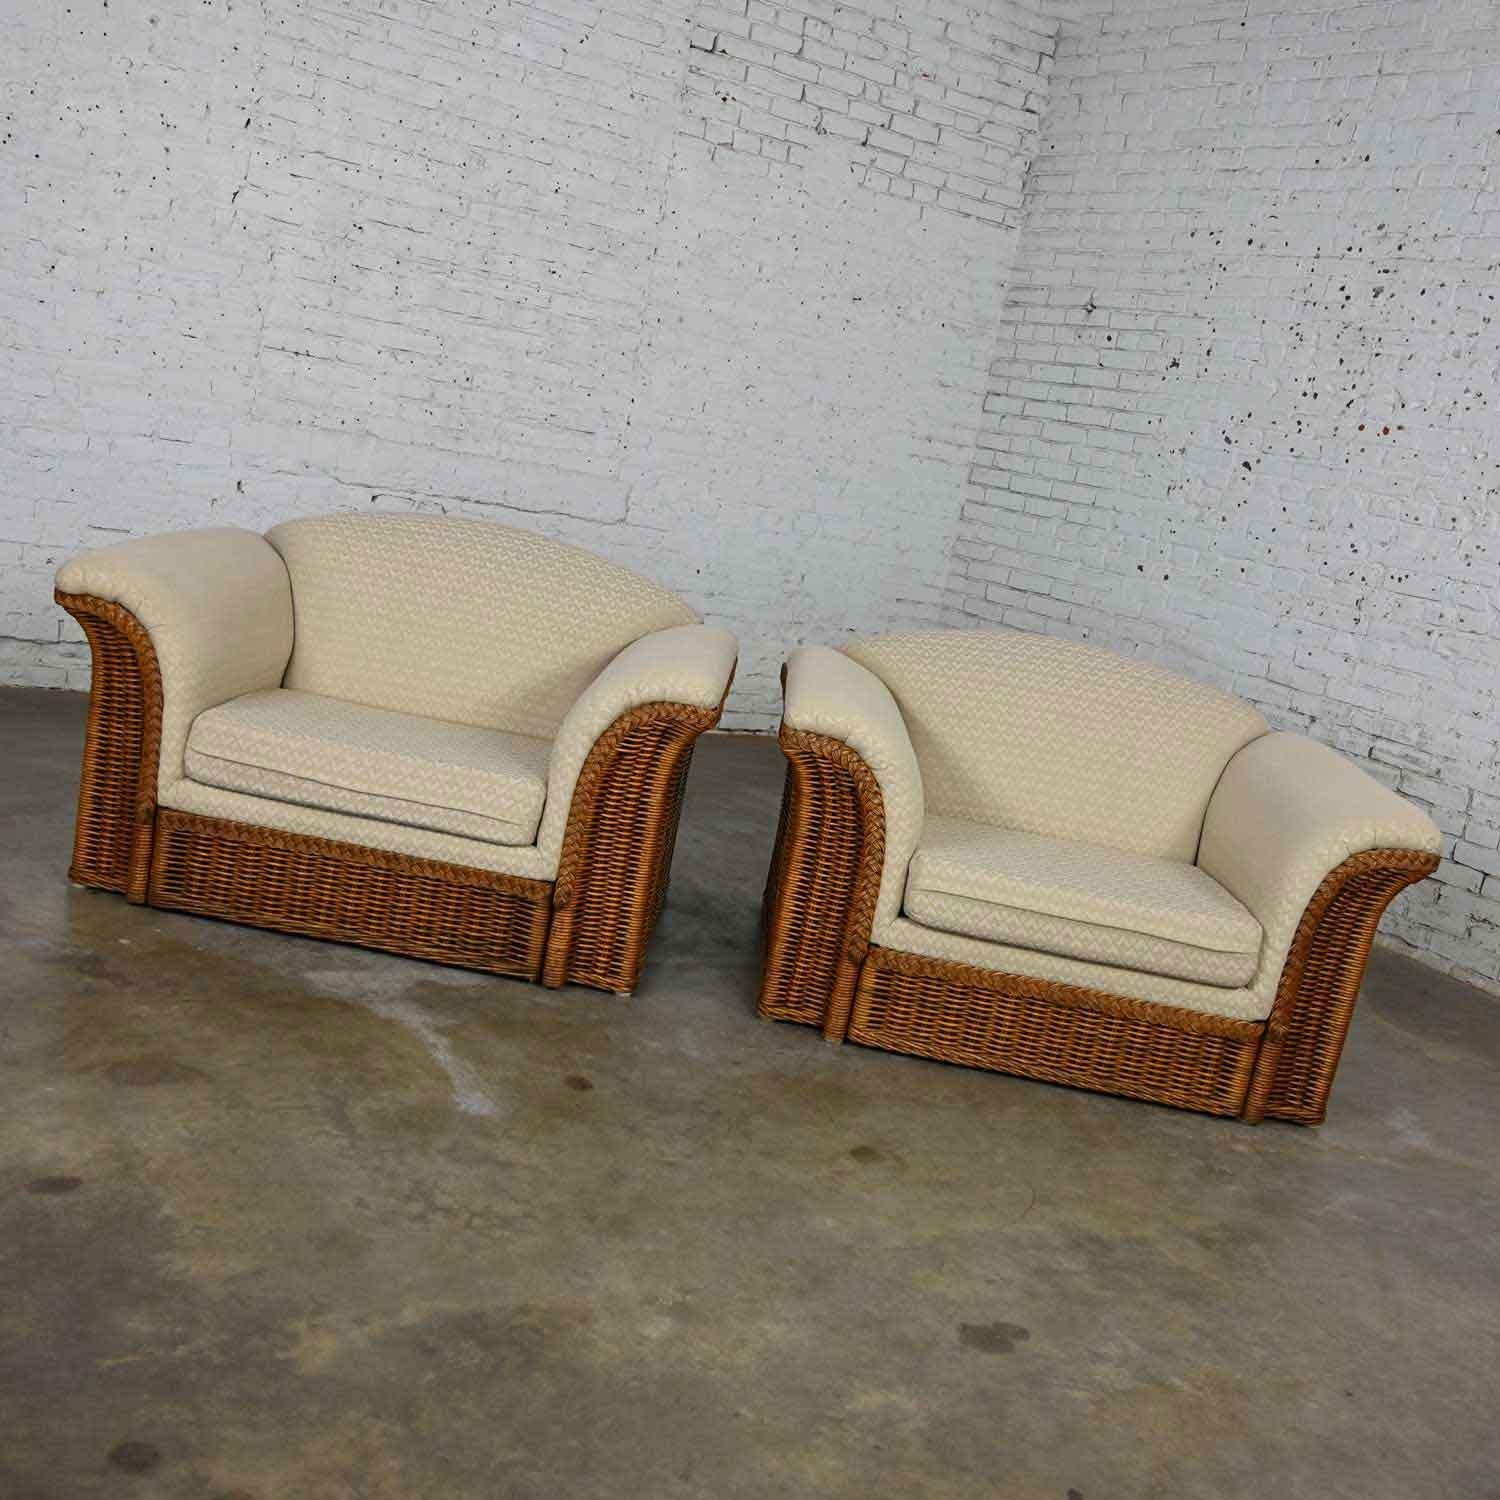 Rattan Wicker Pair of Oversized Lounge Chairs Manner of Michael Taylor For Sale 1